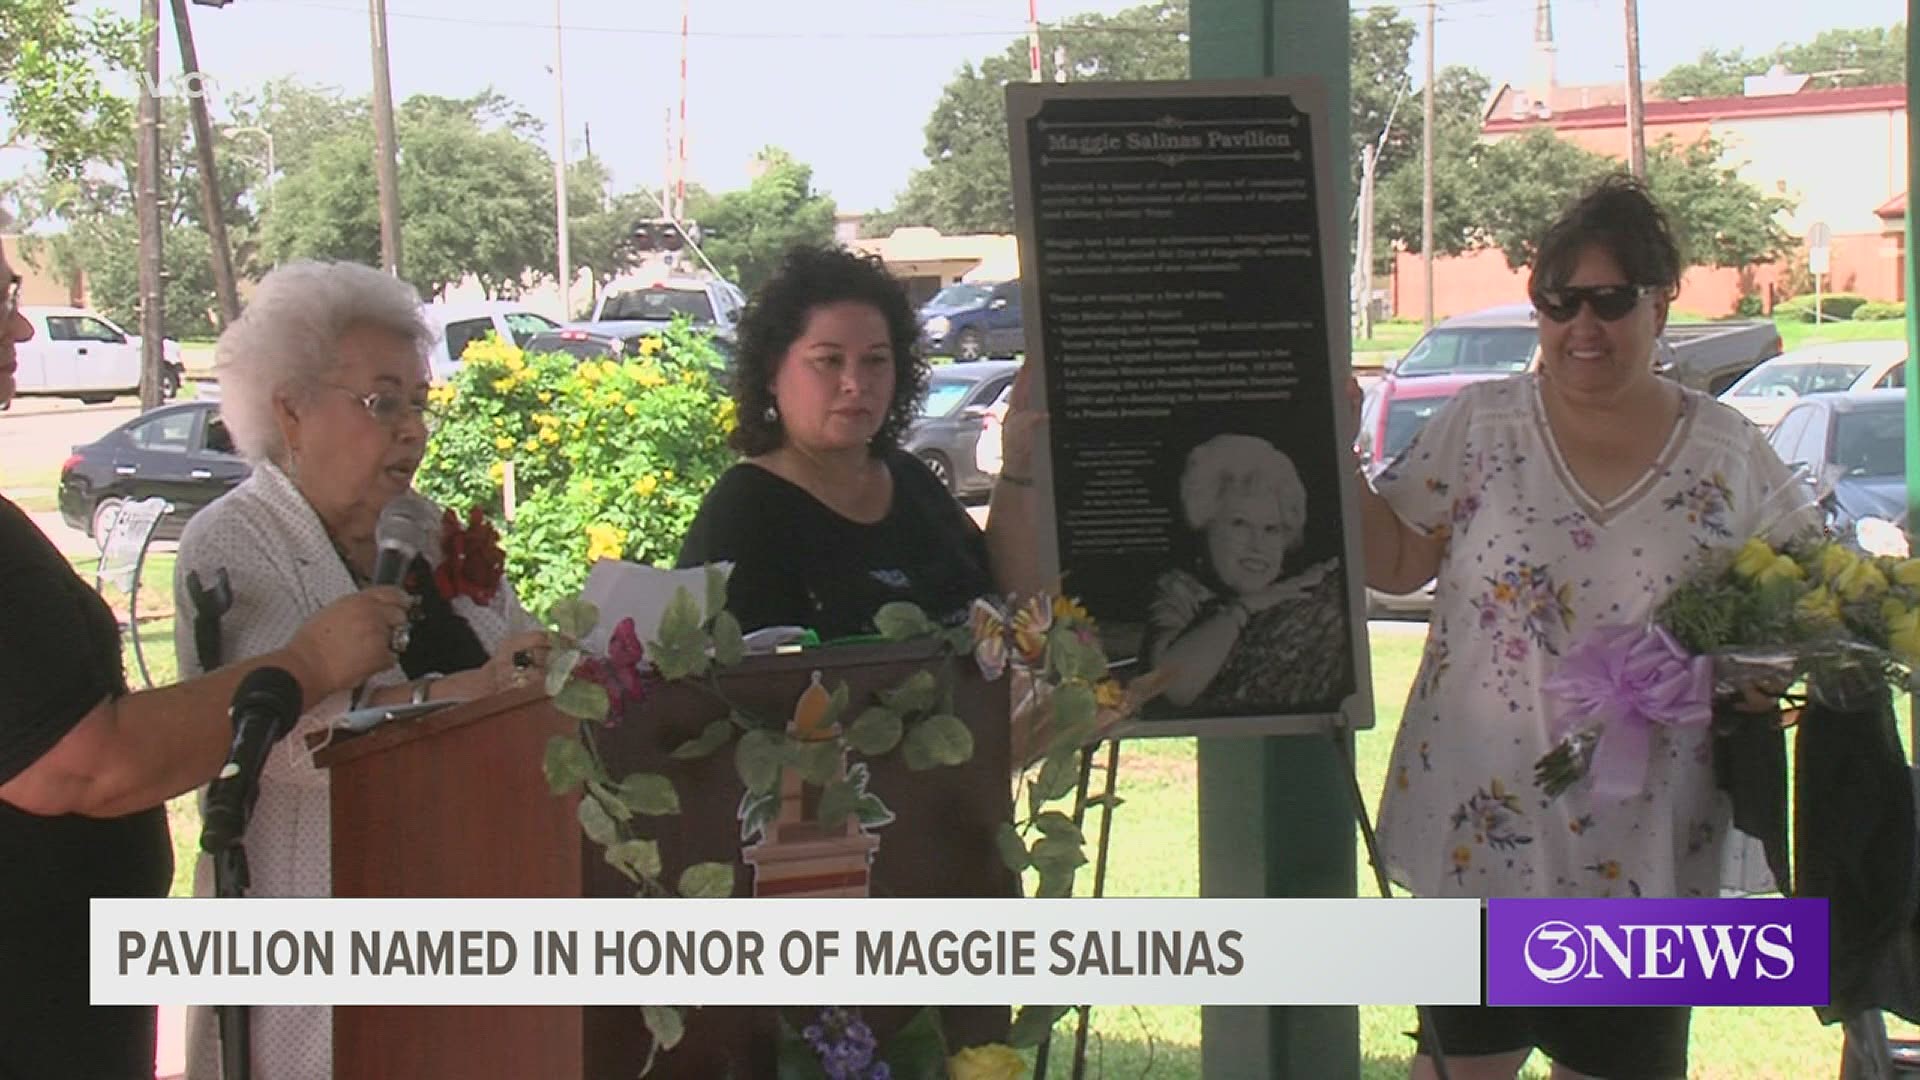 Maggie Salinas has devoted more than 60 years of her life to volunteering and working with the community.